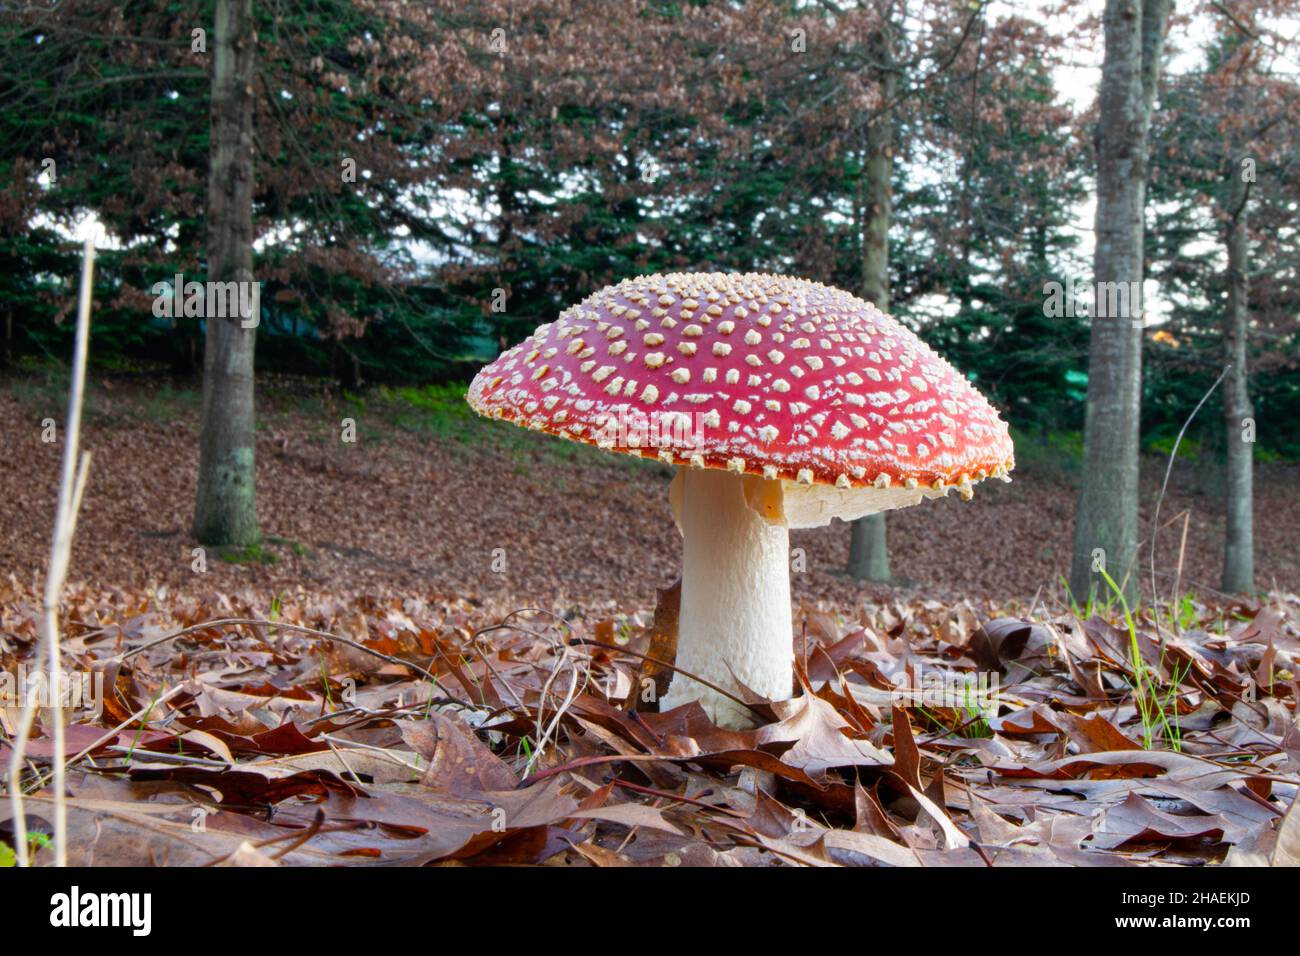 Amanita Muscaria red poisonous wild mushrooms founded hiking in the wilderness at winter season. Stock Photo